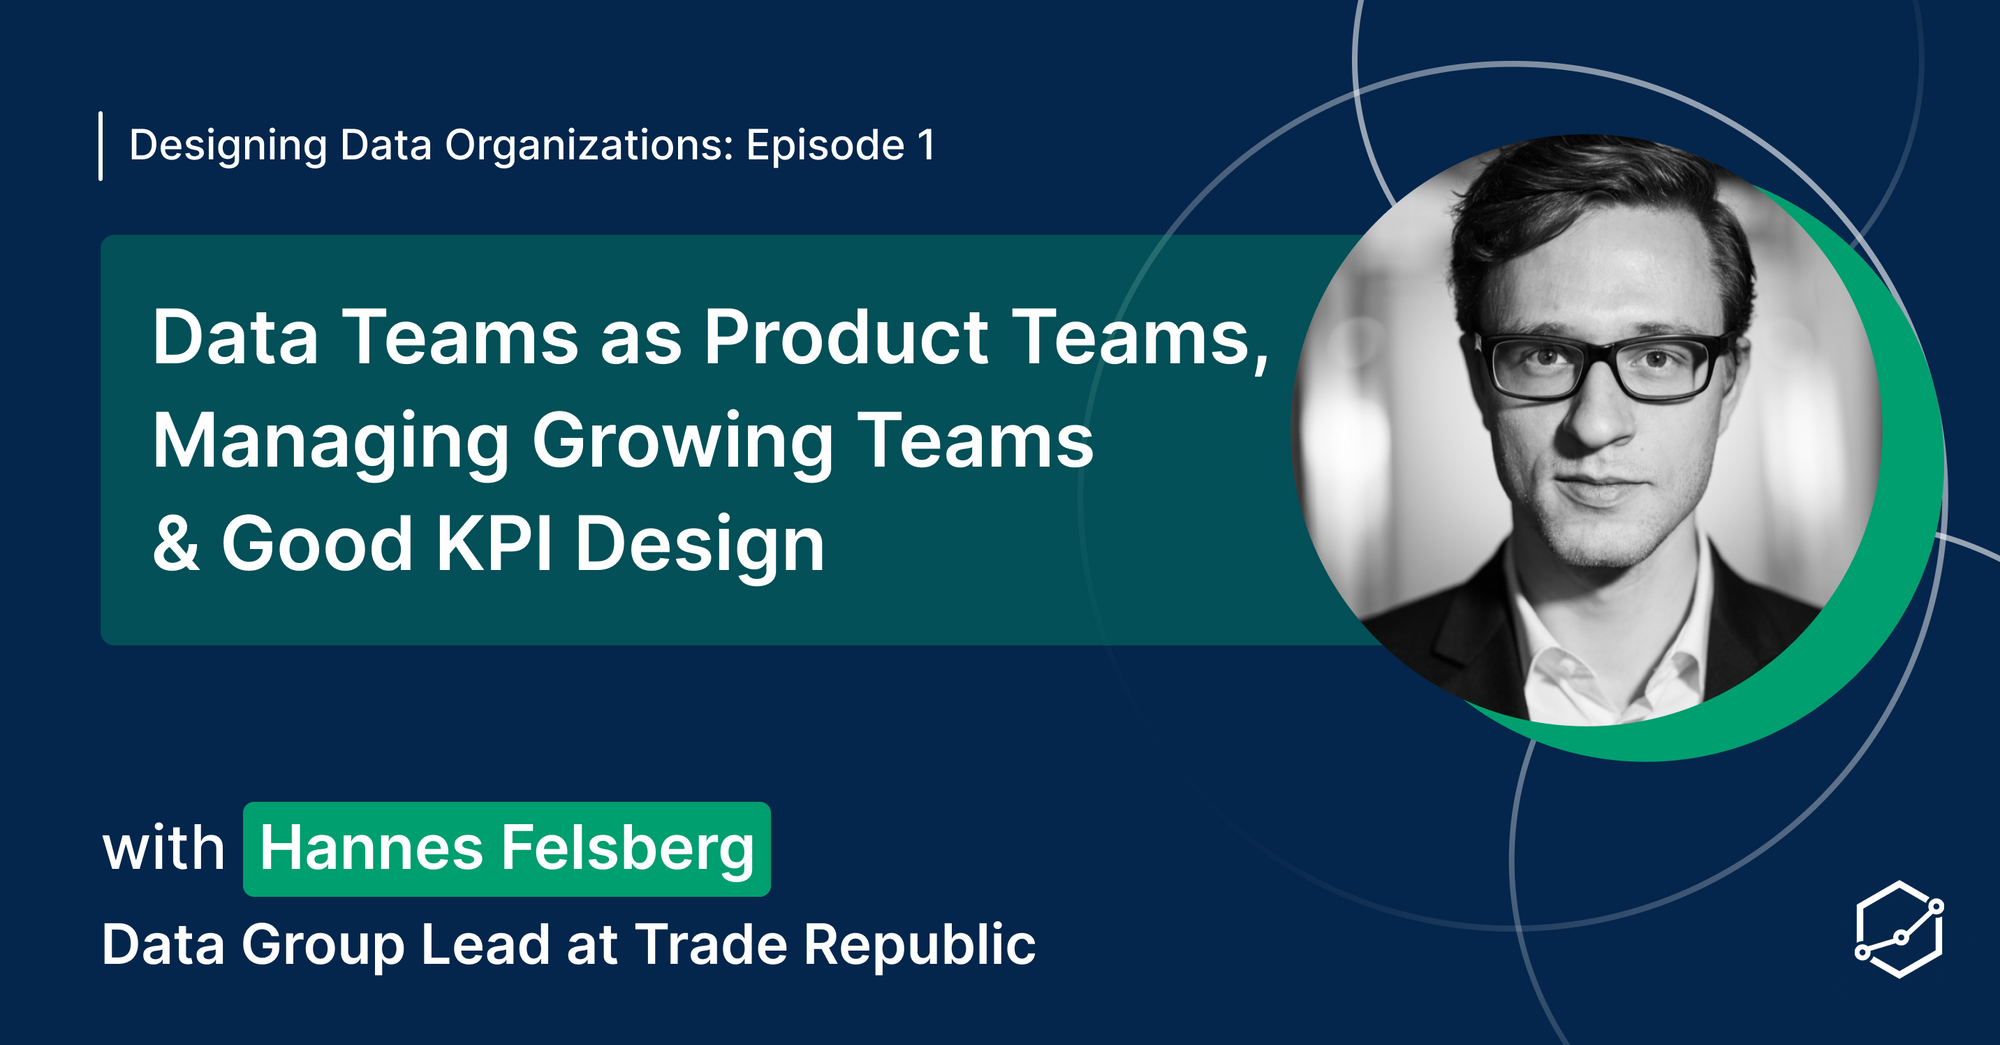 Data Teams as Product Teams, Managing Growing Teams, and Good KPI Design at Trade Republic: An Interview with Hannes Felsberg